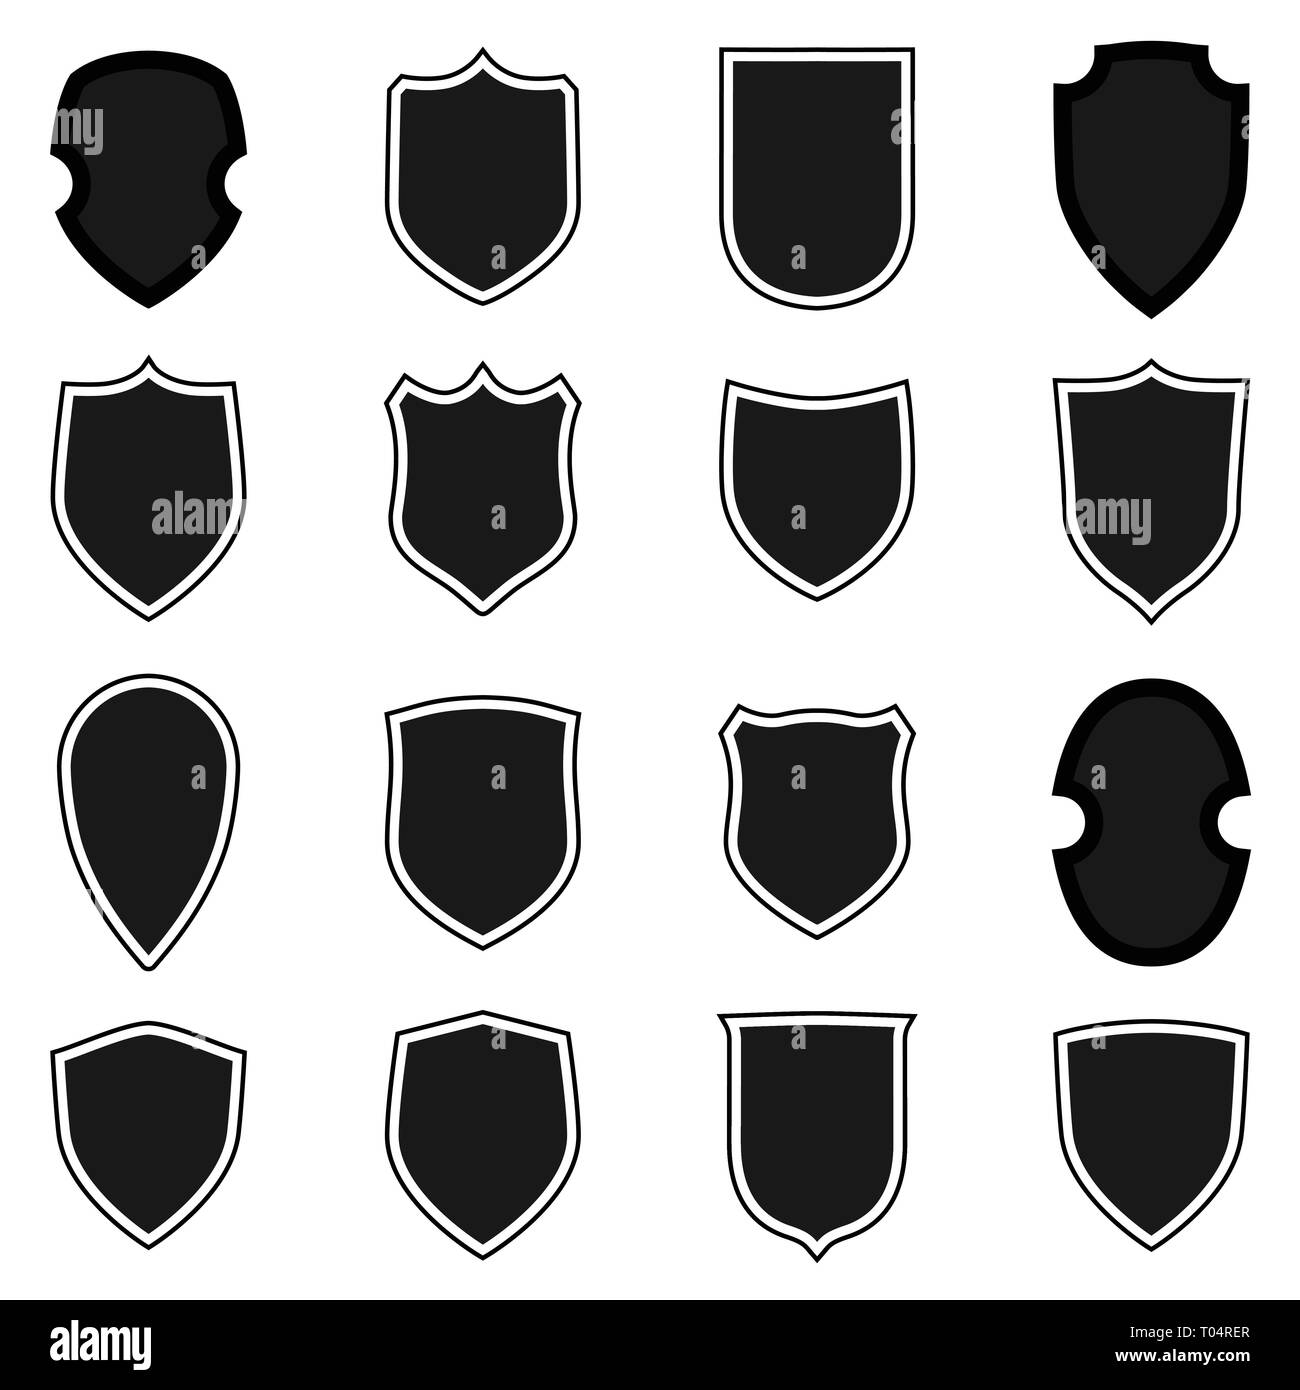 Shield Shapes And Their Meanings